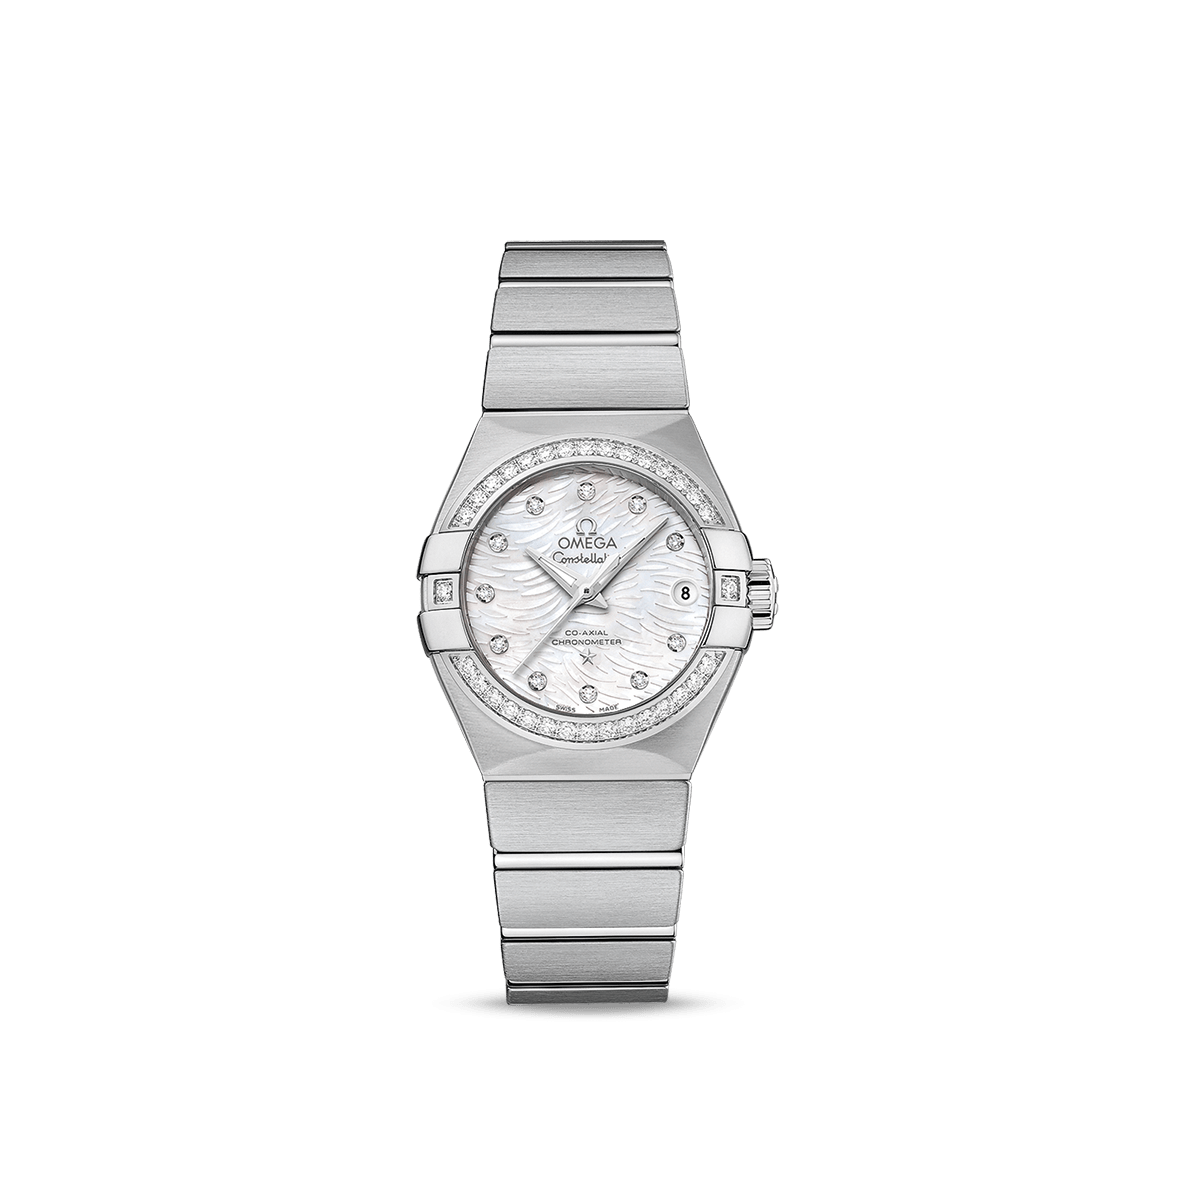 OMEGA Constellation Co-Axial Automatic Ladies Watch - 123.15.27.20.55.003